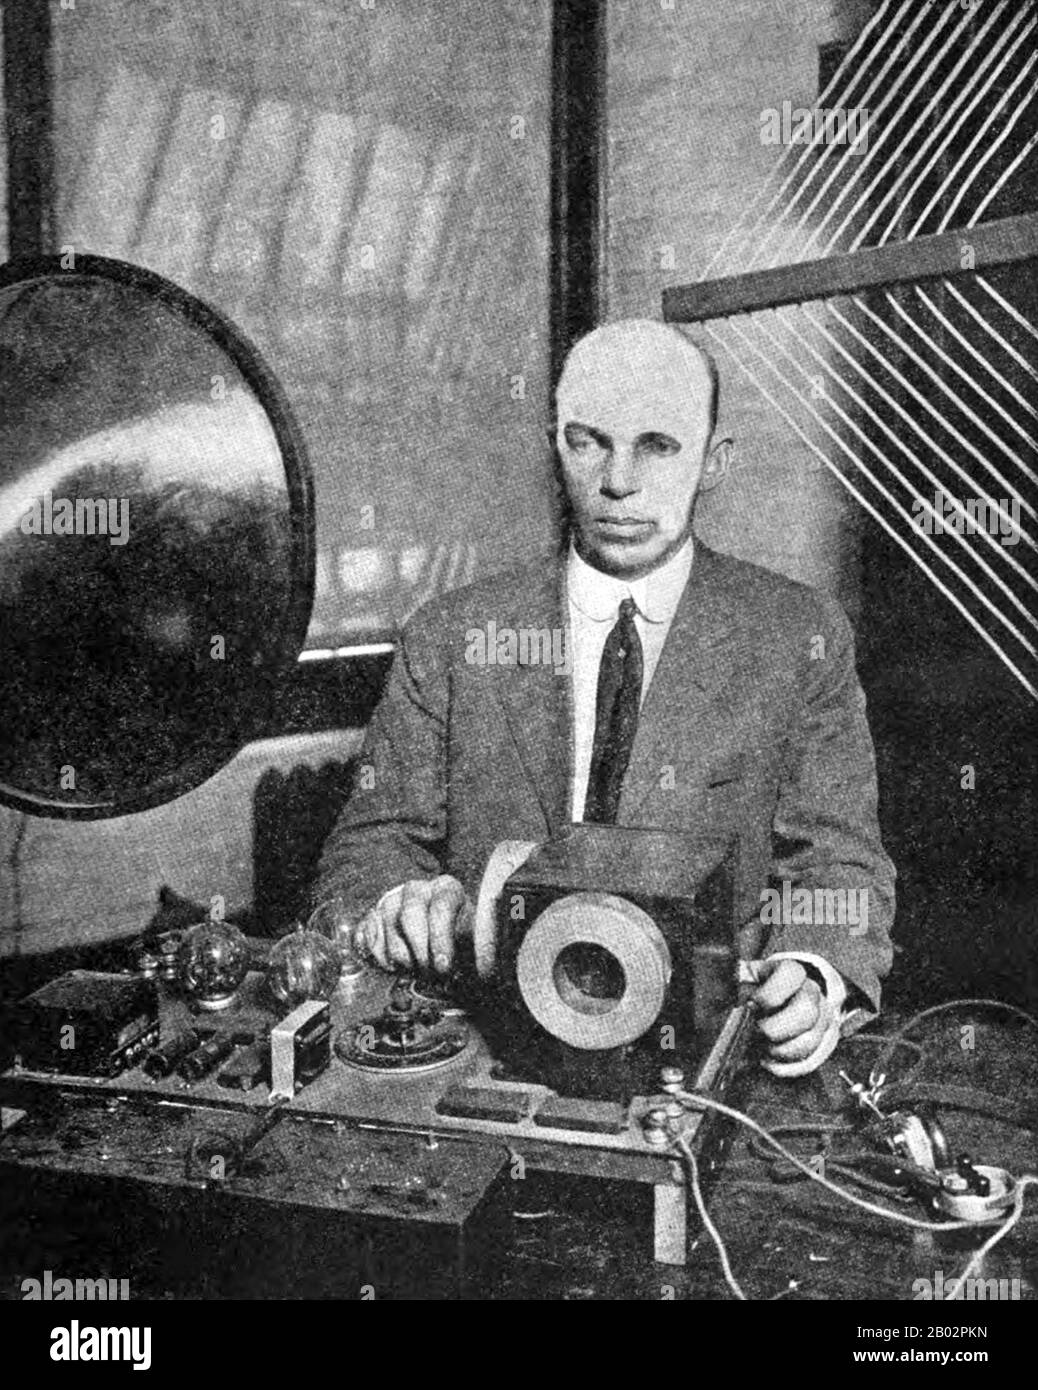 Edwin Howard Armstrong (December 18, 1890 – January 31, 1954) was an American electrical engineer and inventor. He has been called 'the most prolific and influential inventor in radio history'. He invented the regenerative circuit while he was an undergraduate and patented it in 1914, followed by the super-regenerative circuit in 1922, and the superheterodyne receiver in 1918. Armstrong was also the inventor of modern frequency modulation (FM) radio transmission.  Armstrong was born in New York City, New York, in 1890. He studied at Columbia University. He later became a professor at Columbia Stock Photo